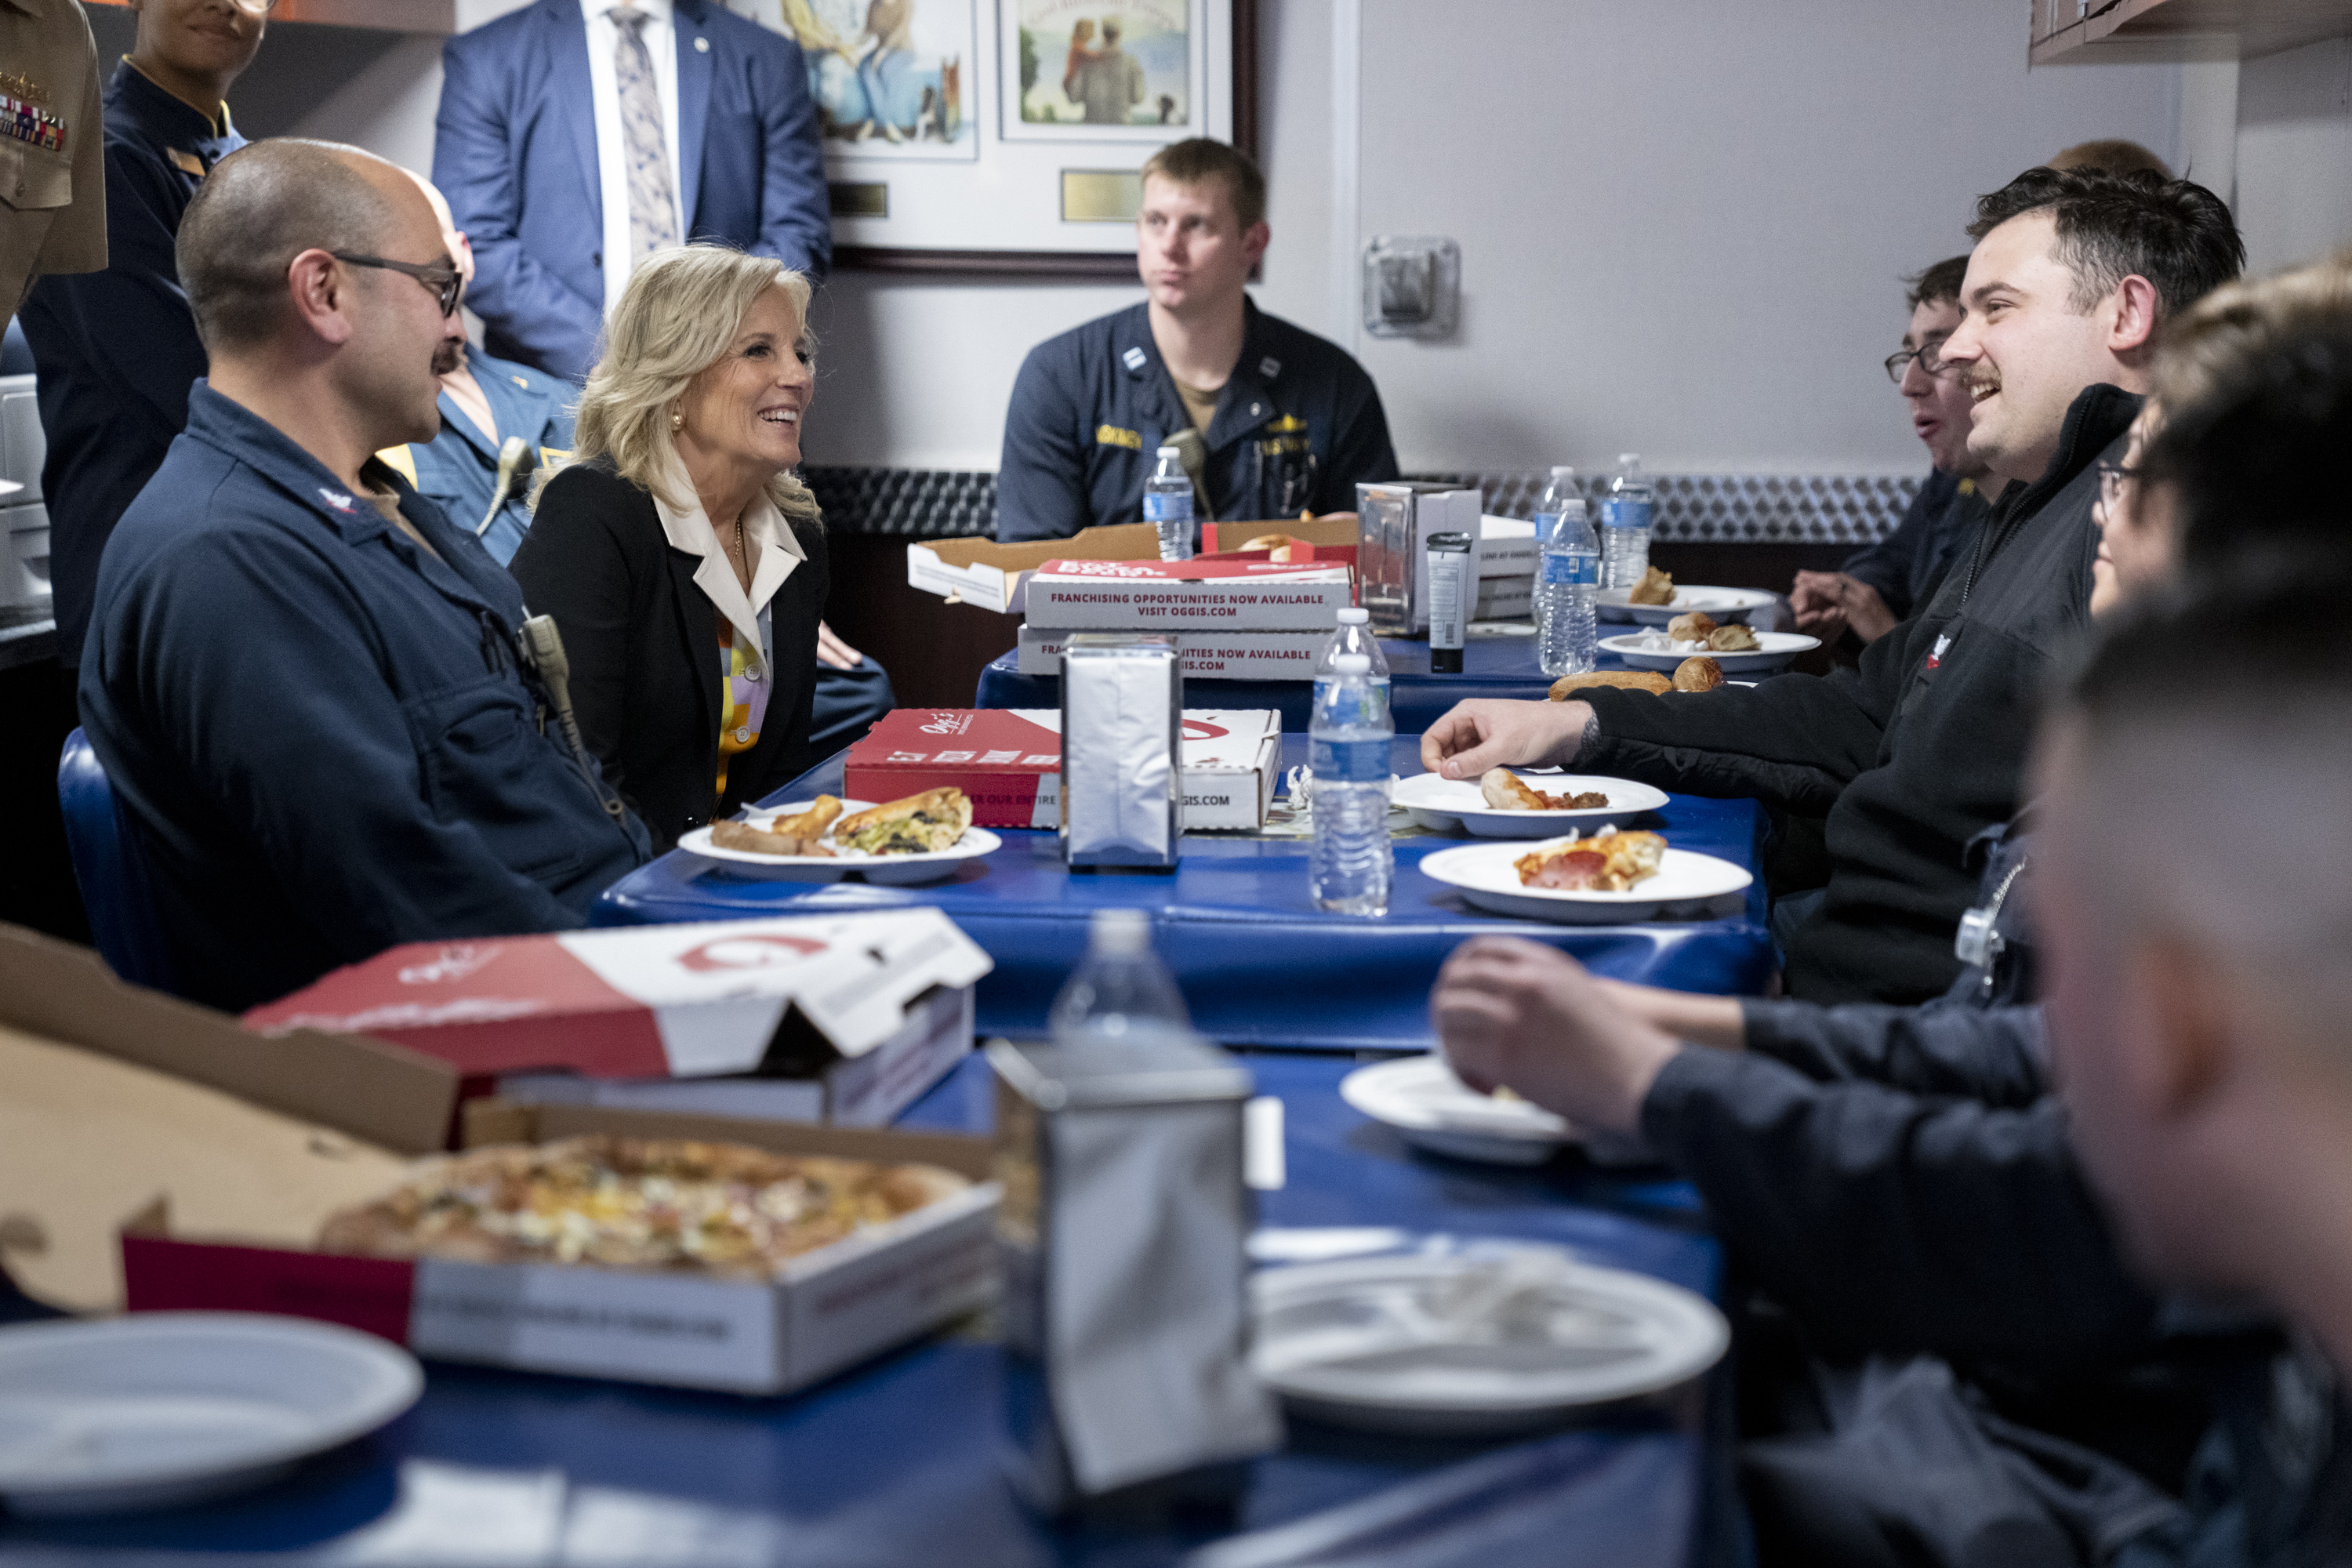 First Lady Jill Biden delivers pizzas and meets with the crew of the USS Gabrielle Giffords, Friday, February 3, 2023, at San Diego Naval Base in National City, California.